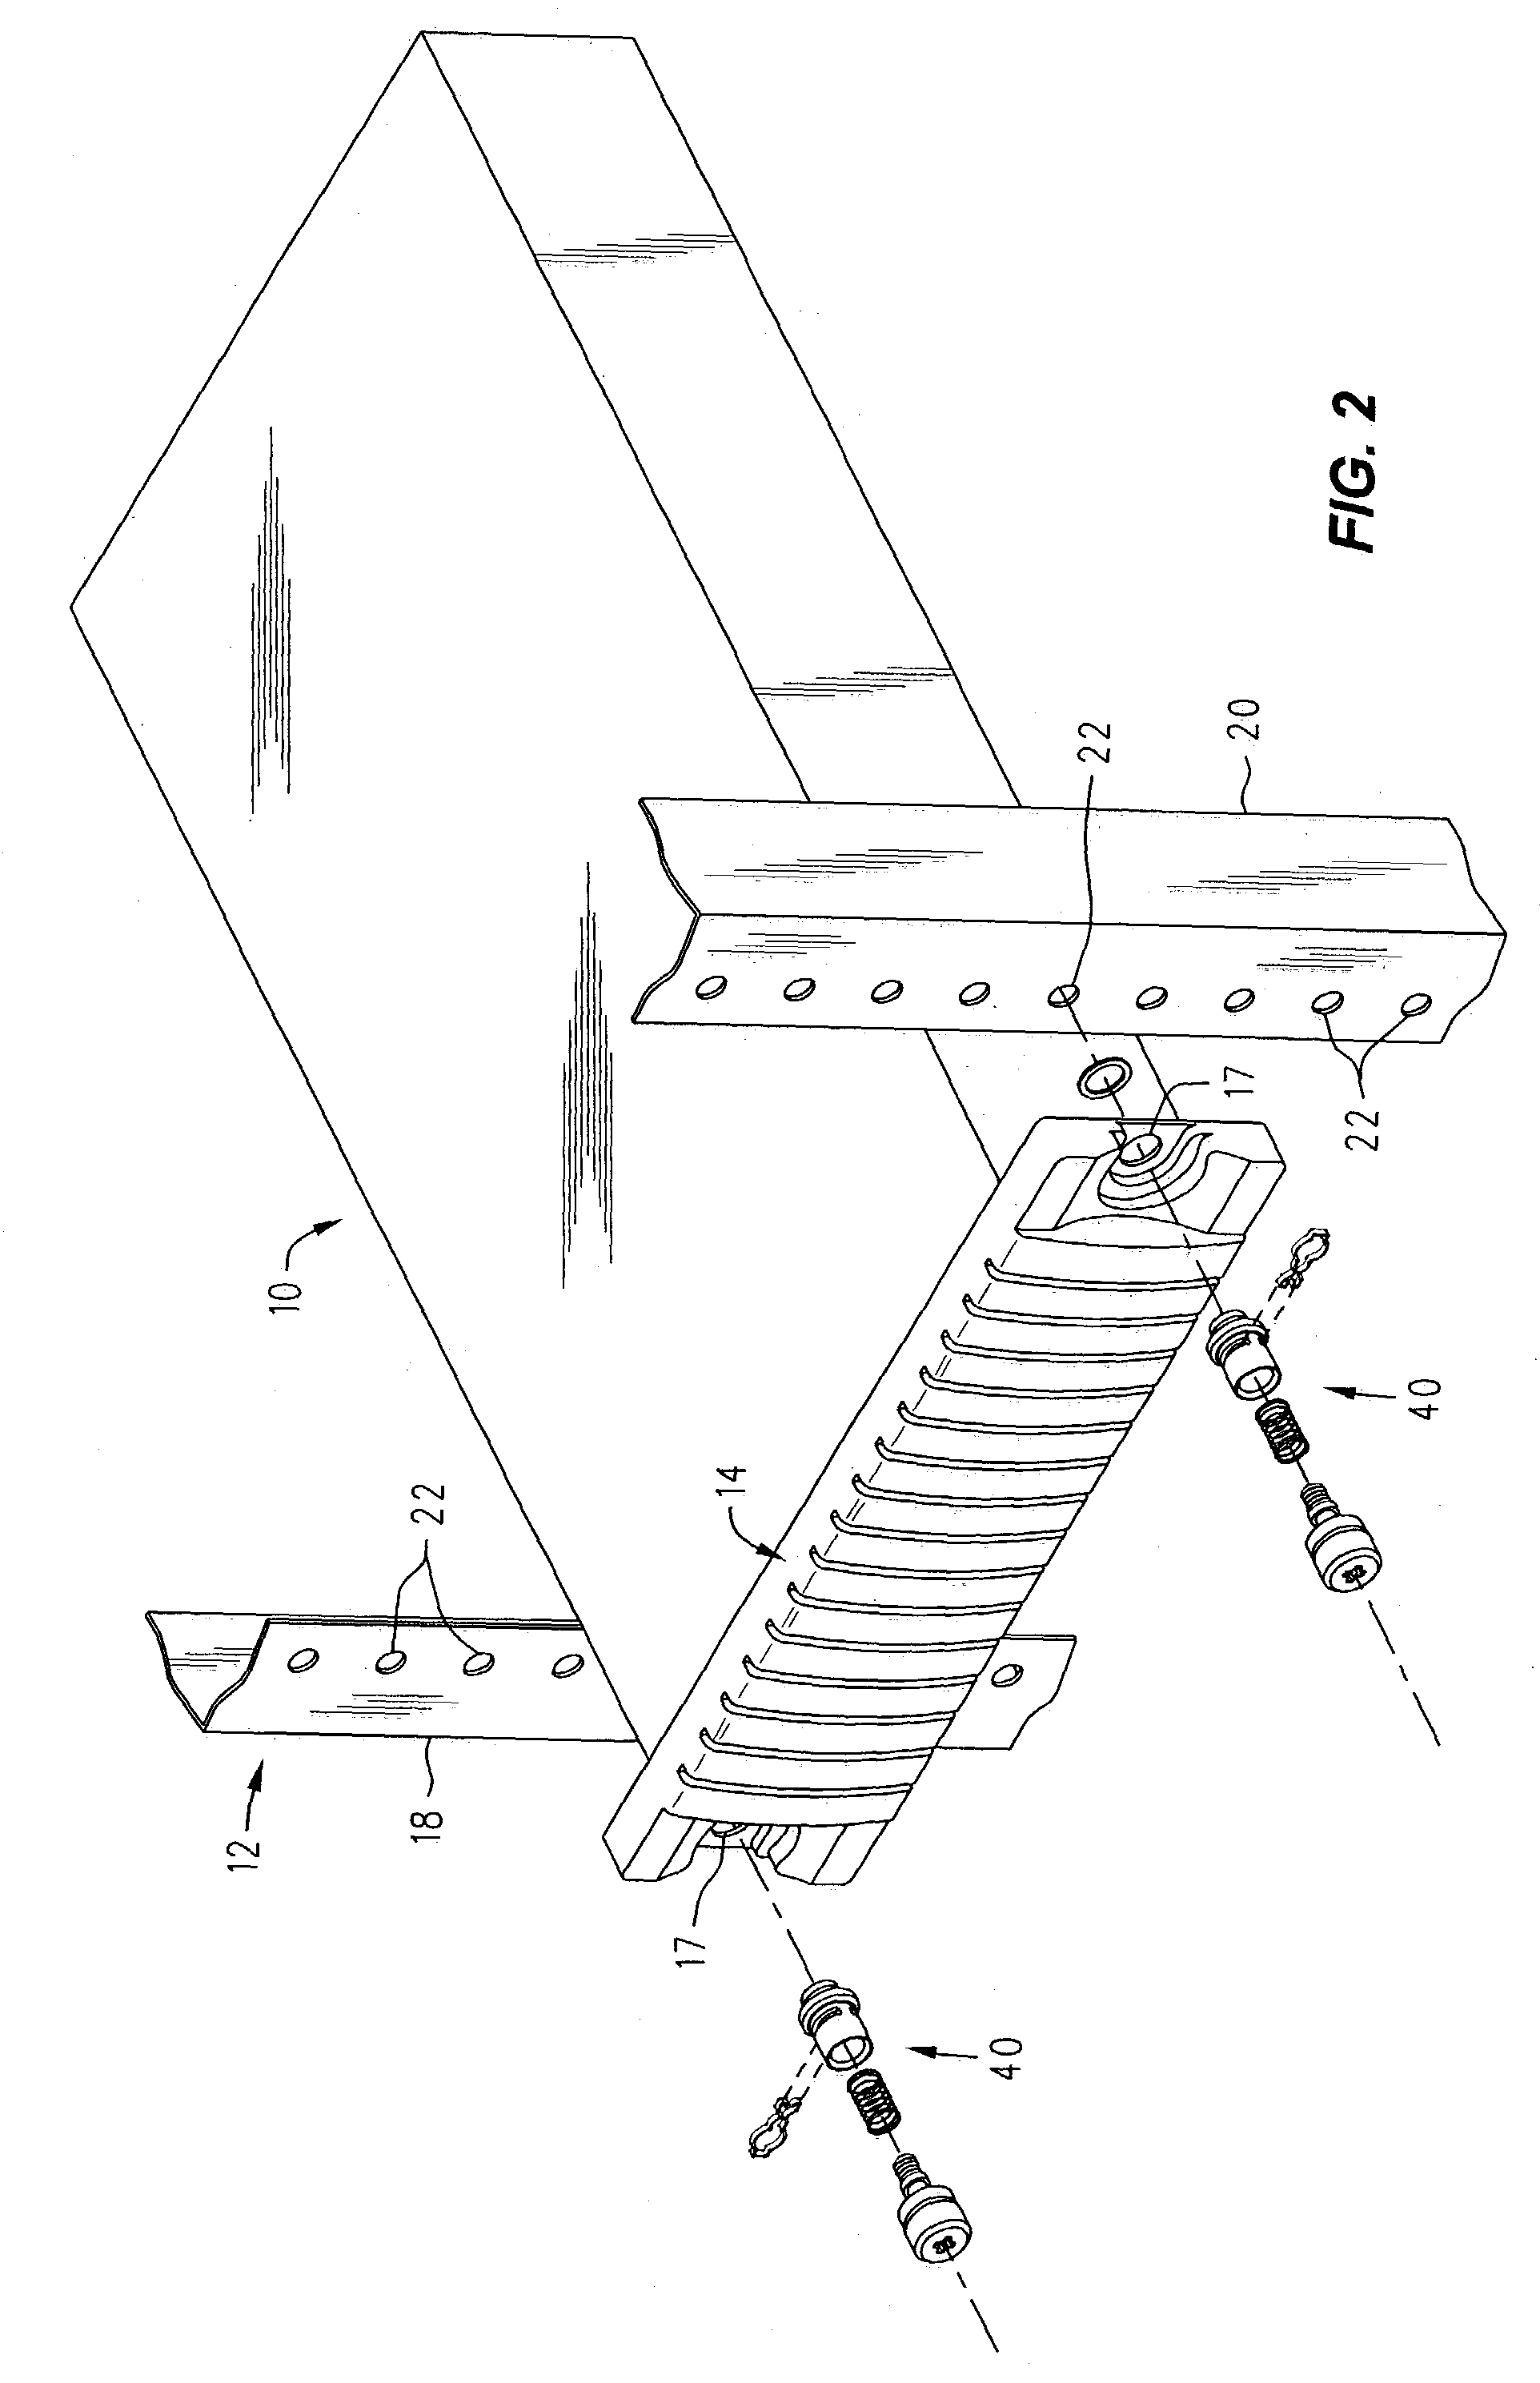 Mounting device for securing an electronic device to an equipment rack